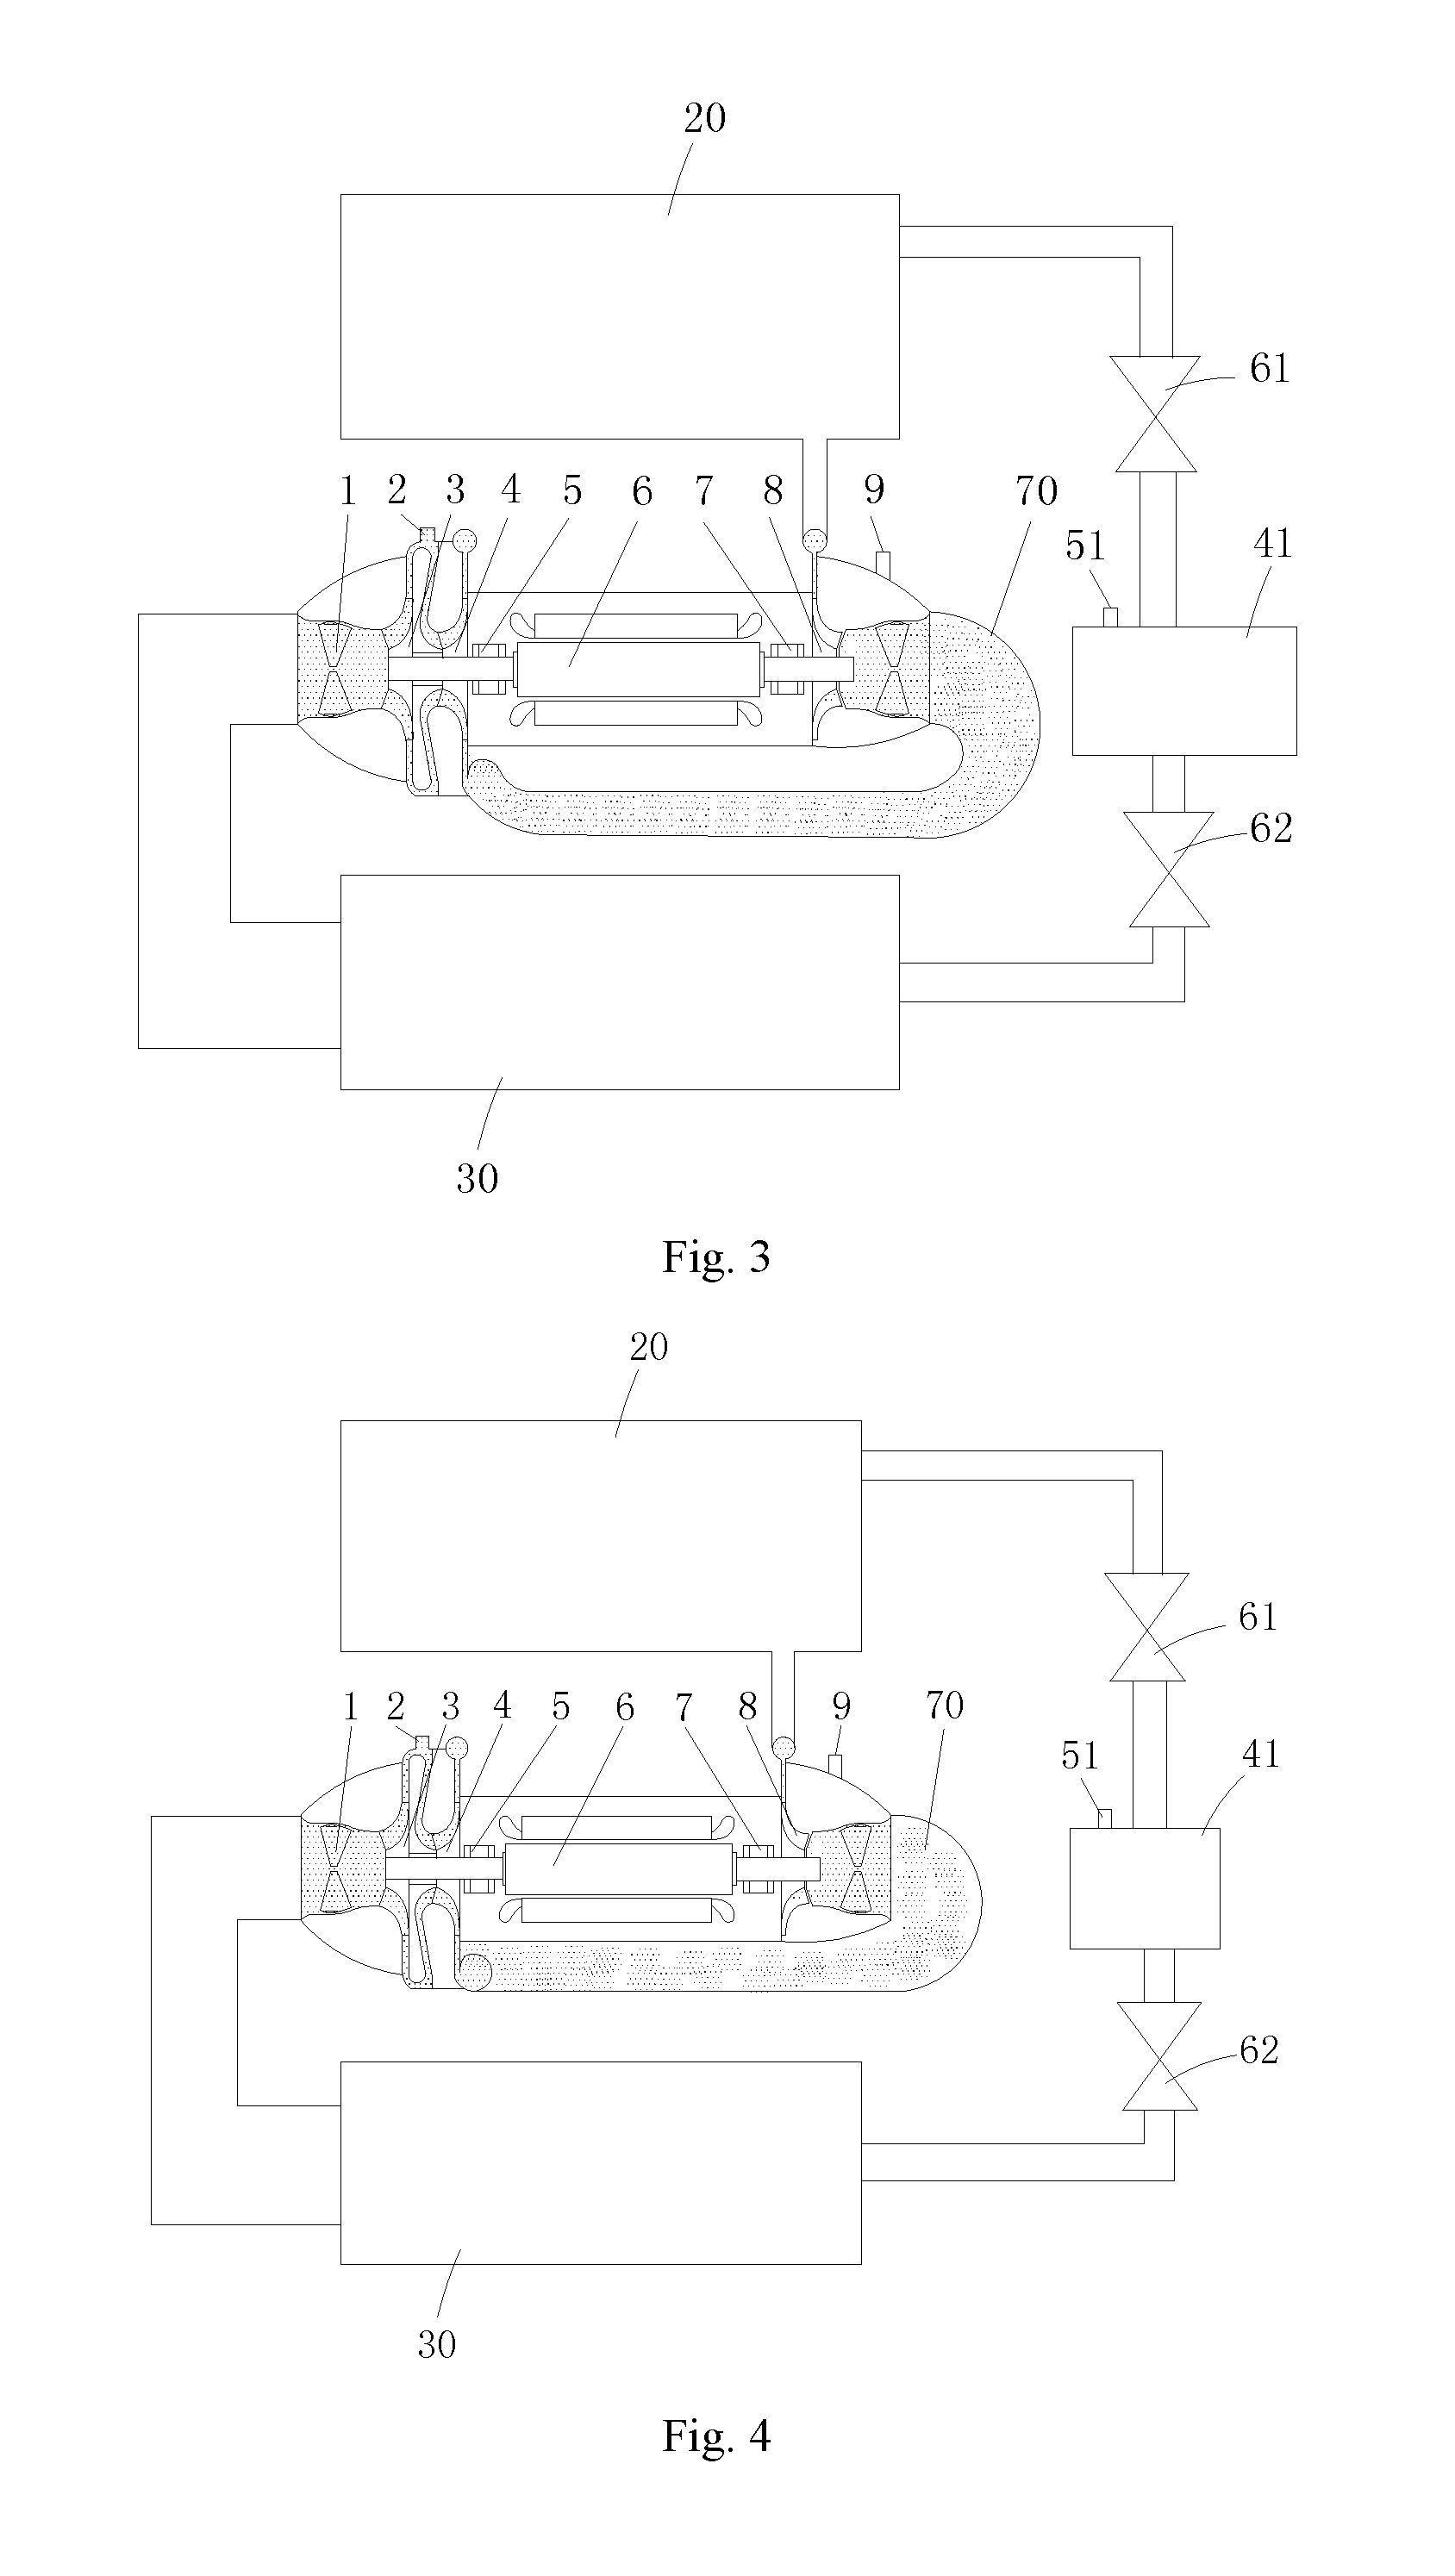 Multi-stage centrifugal compressor and air conditioning unit